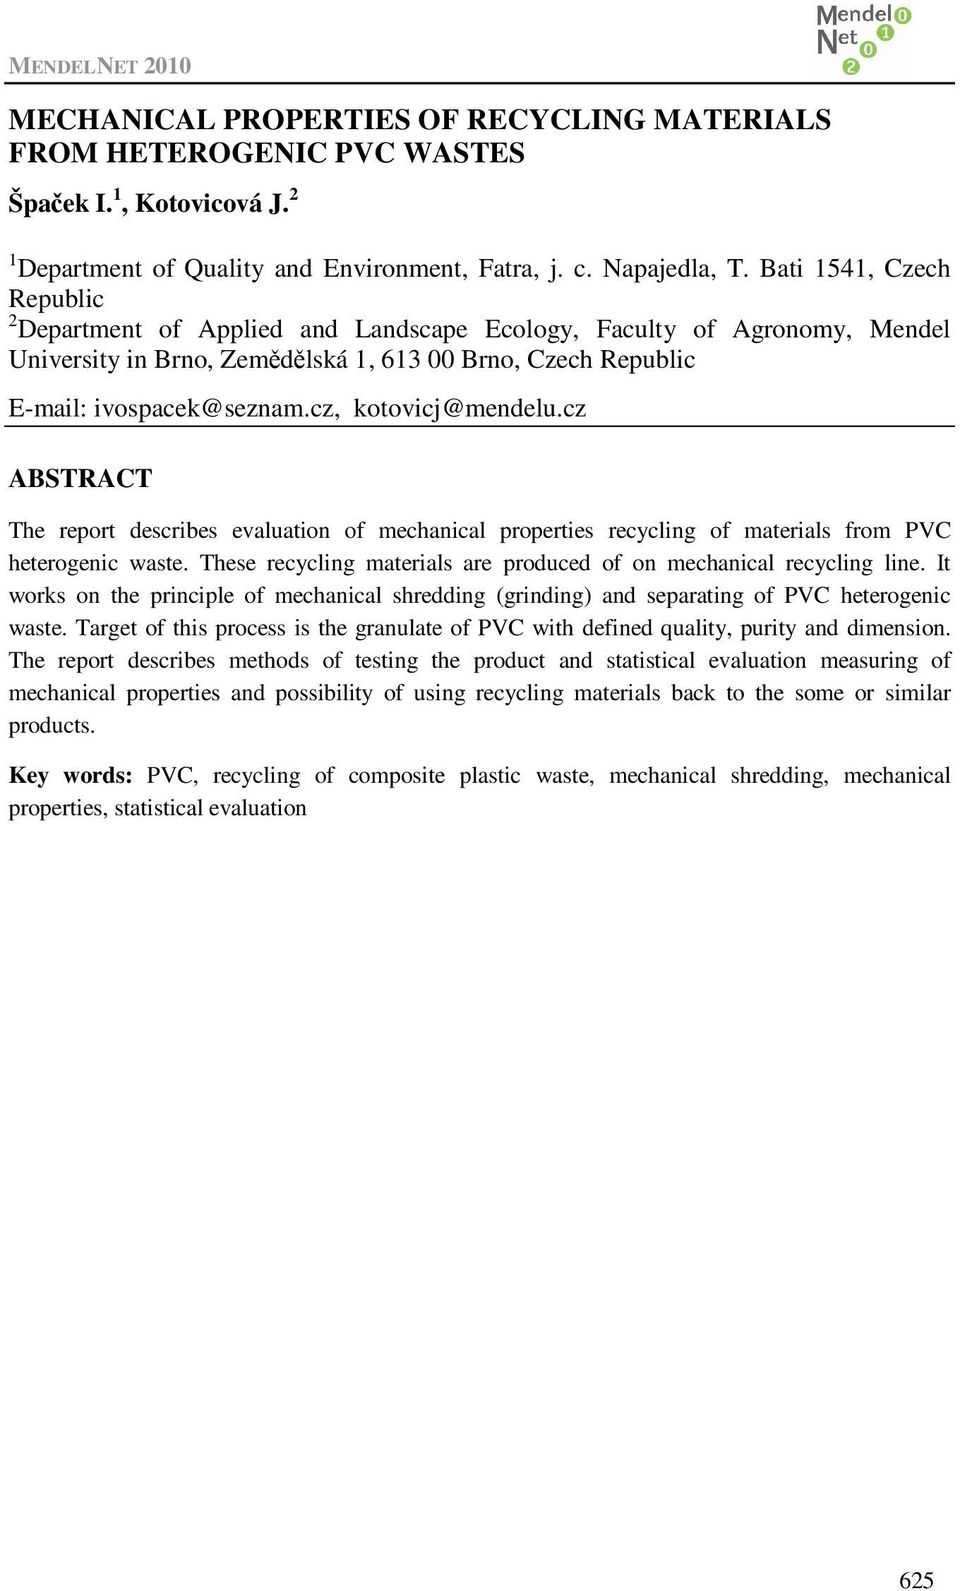 cz, kotovicj@mendelu.cz ABSTRACT The report describes evaluation of mechanical properties recycling of materials from PVC heterogenic waste.